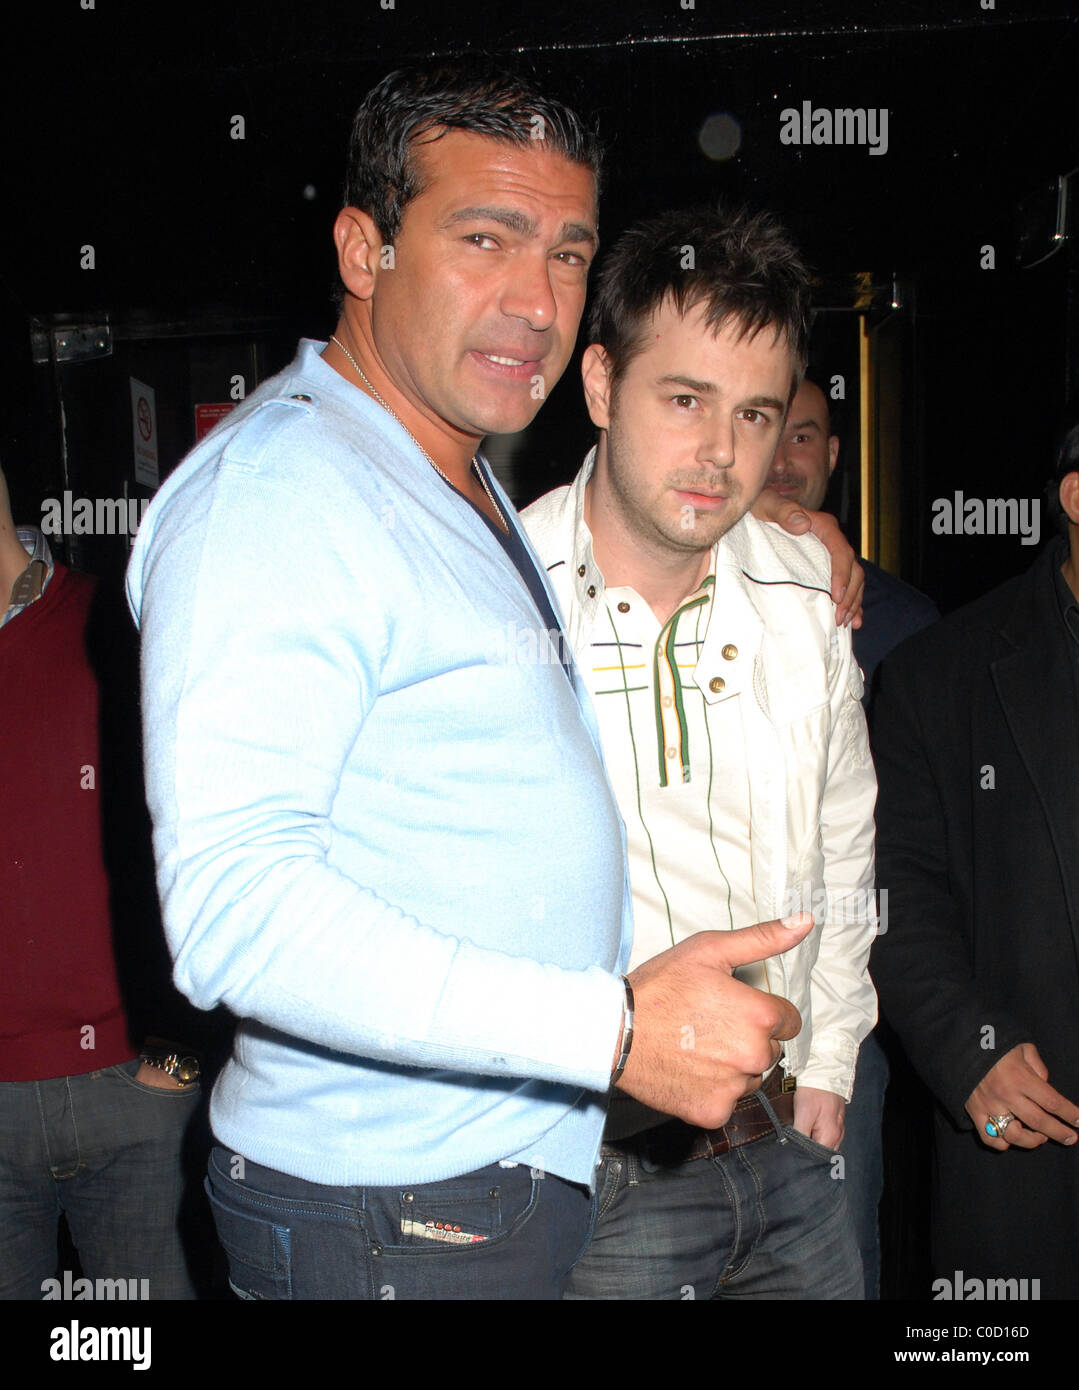 Danny Dyer and Tamer Hassan, Former Big Brother star Nikki Grahame's 26th Birthday Party at Embassy London, England - 24.04.08 Stock Photo